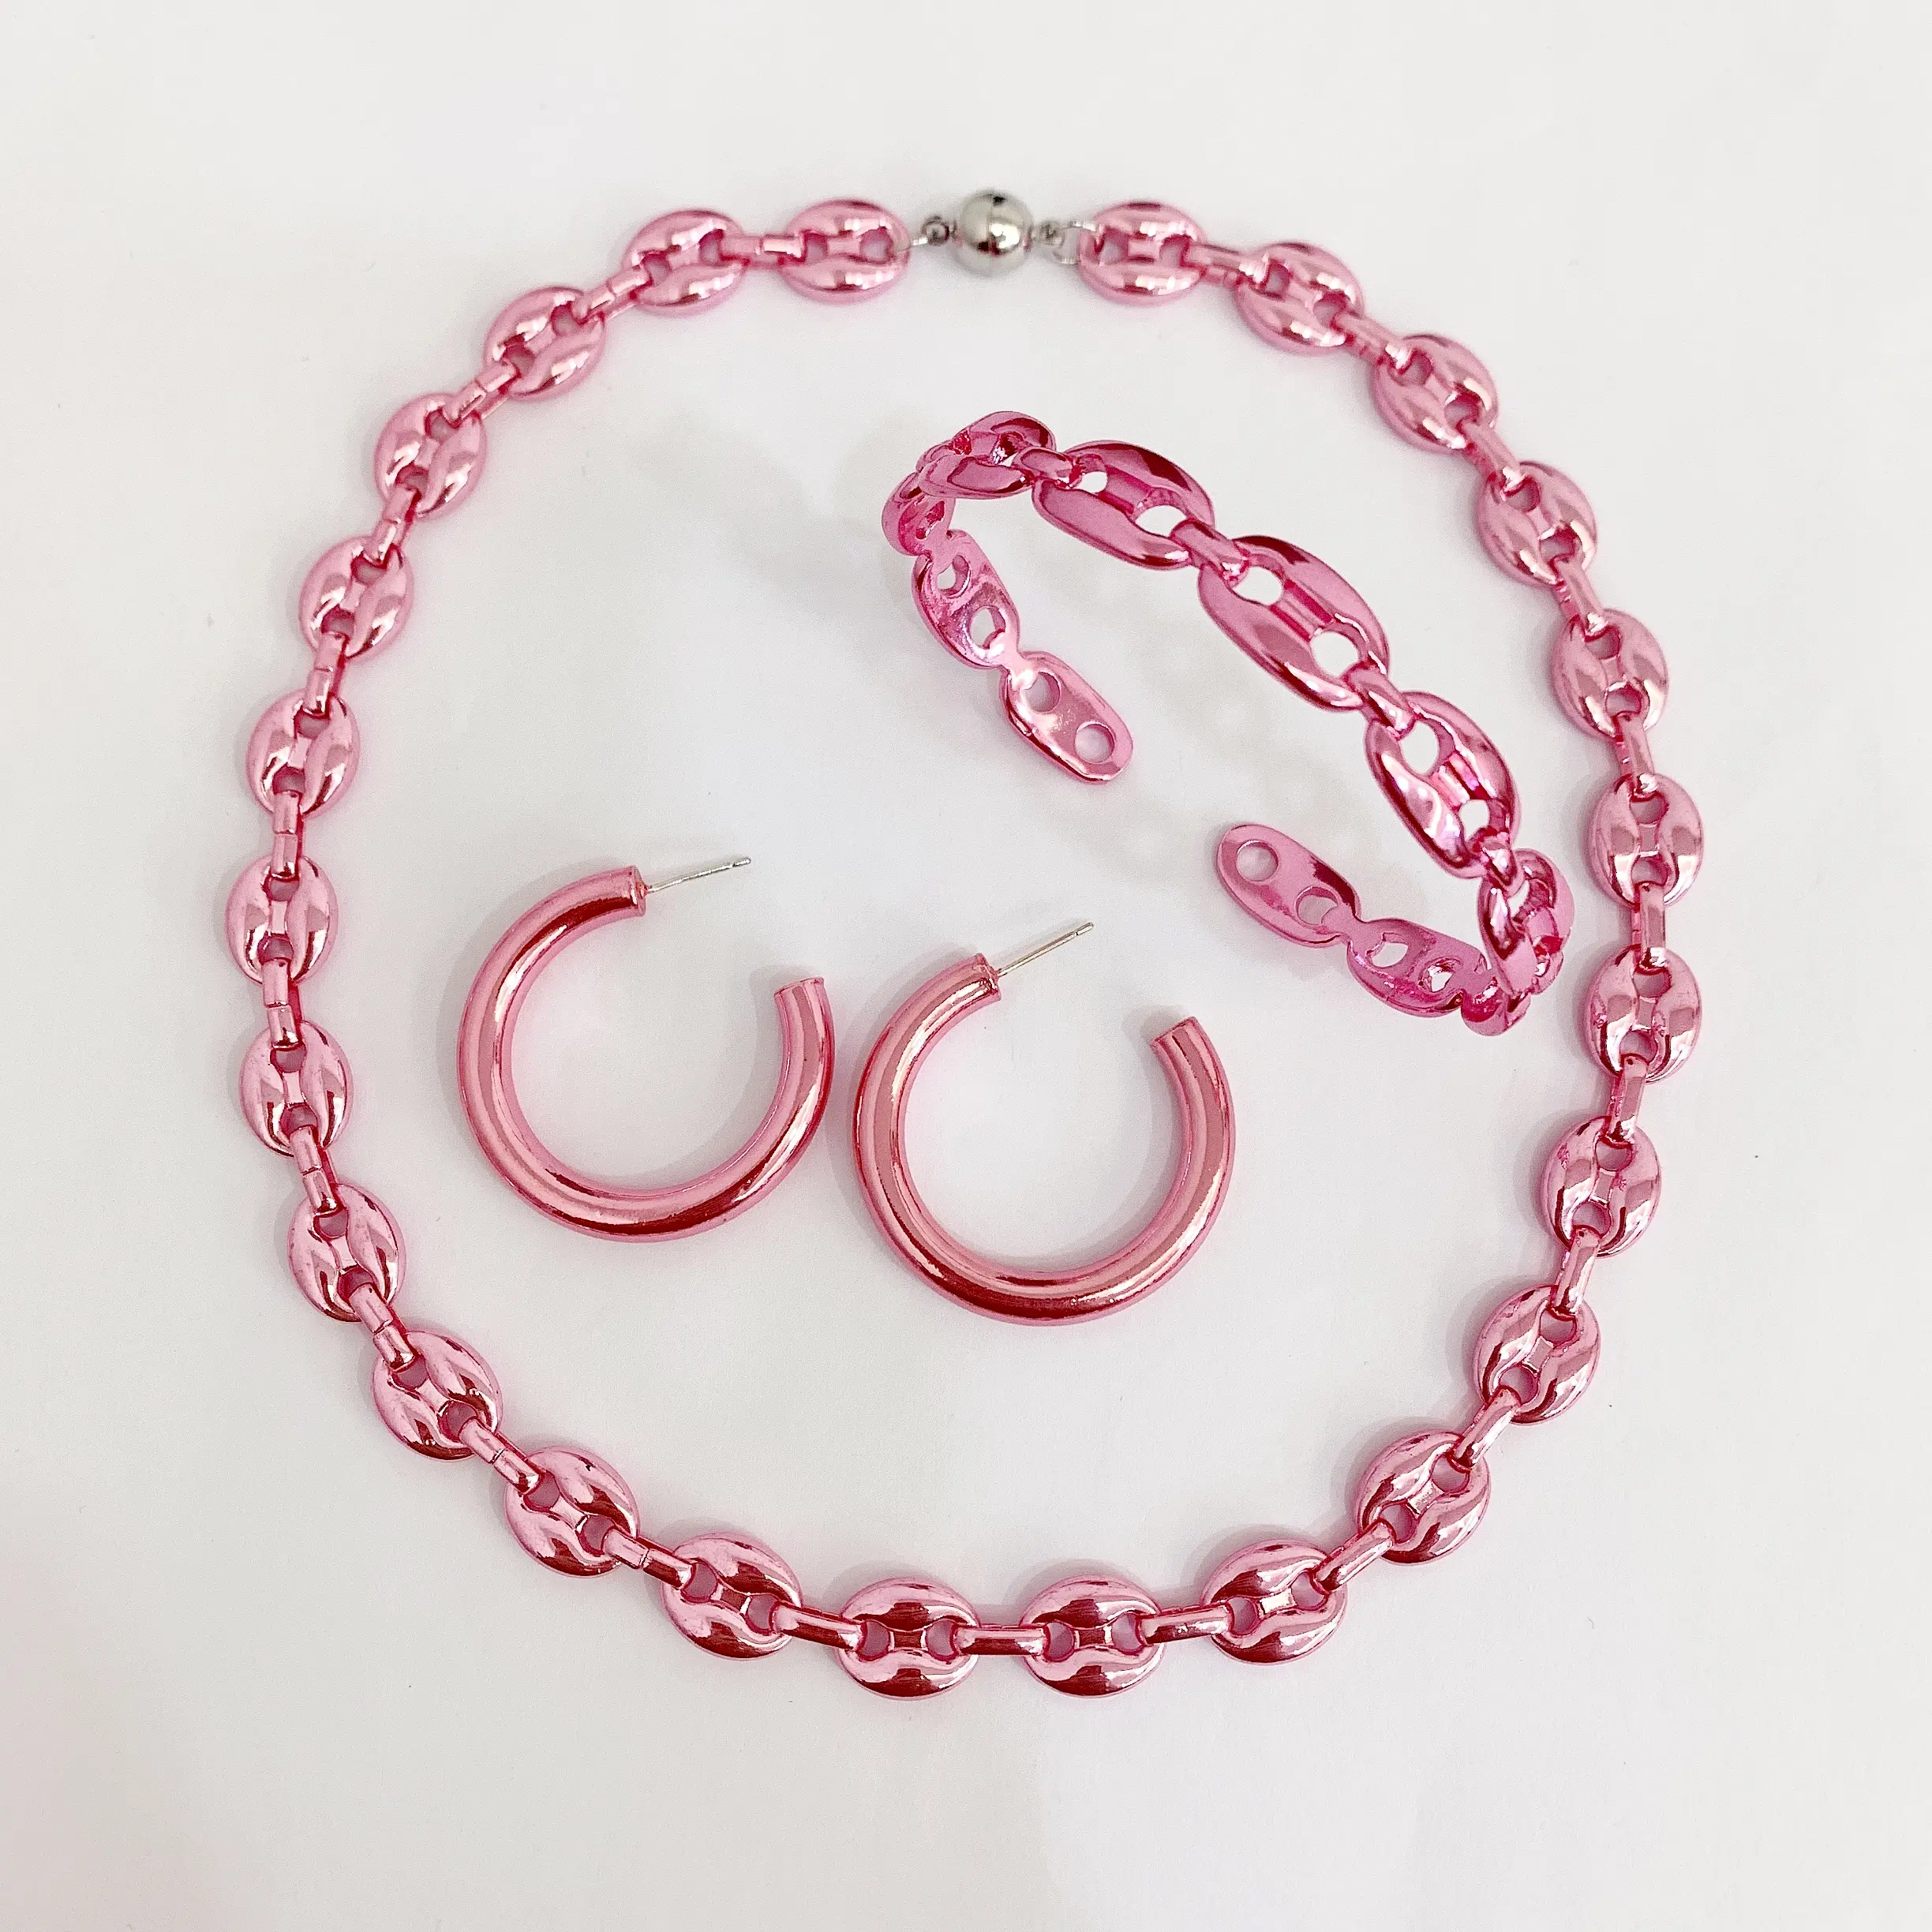 LS-L1723 Beautiful pink fashion necklaces chain necklace metallic hoop earring jewelry set